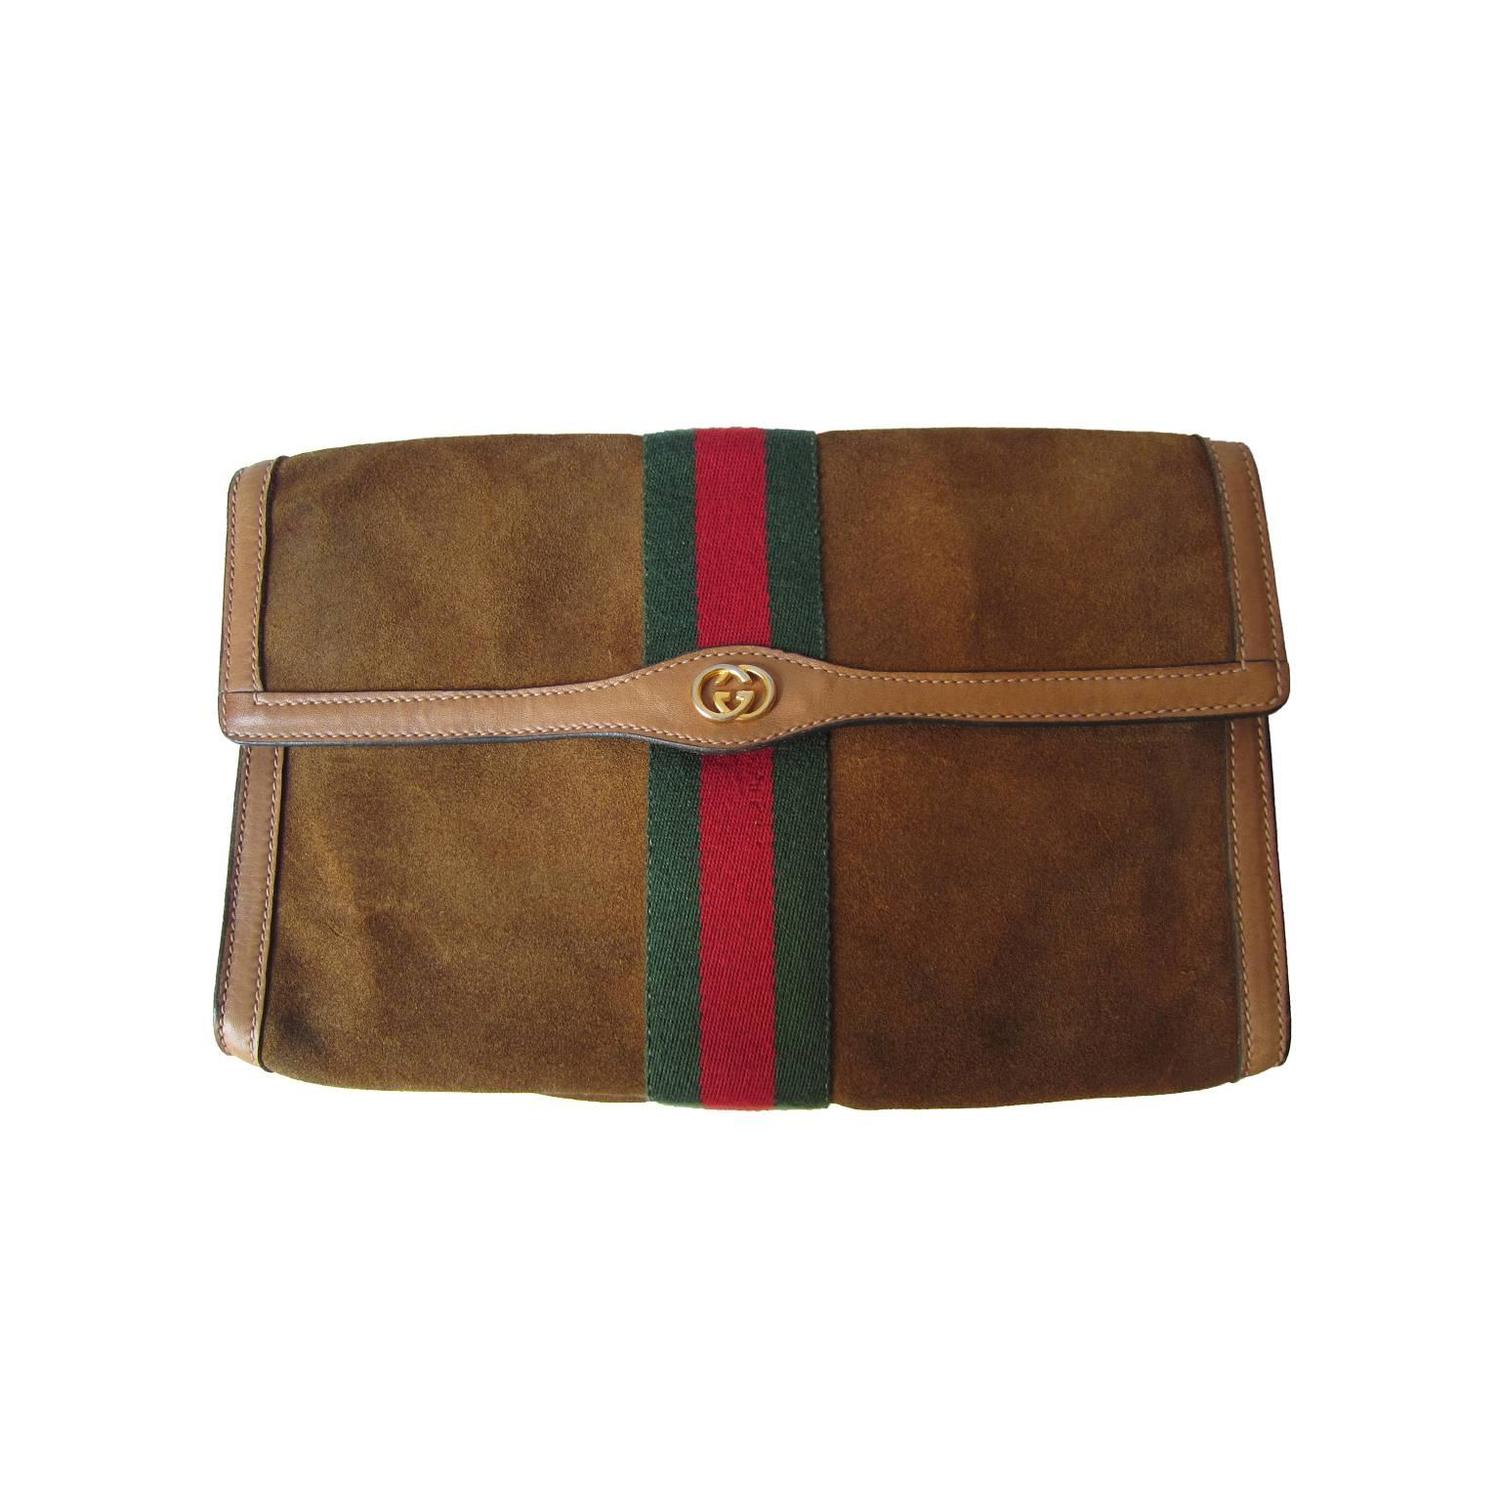 Gucci Classic Suede Clutch Bag 60s at 1stdibs